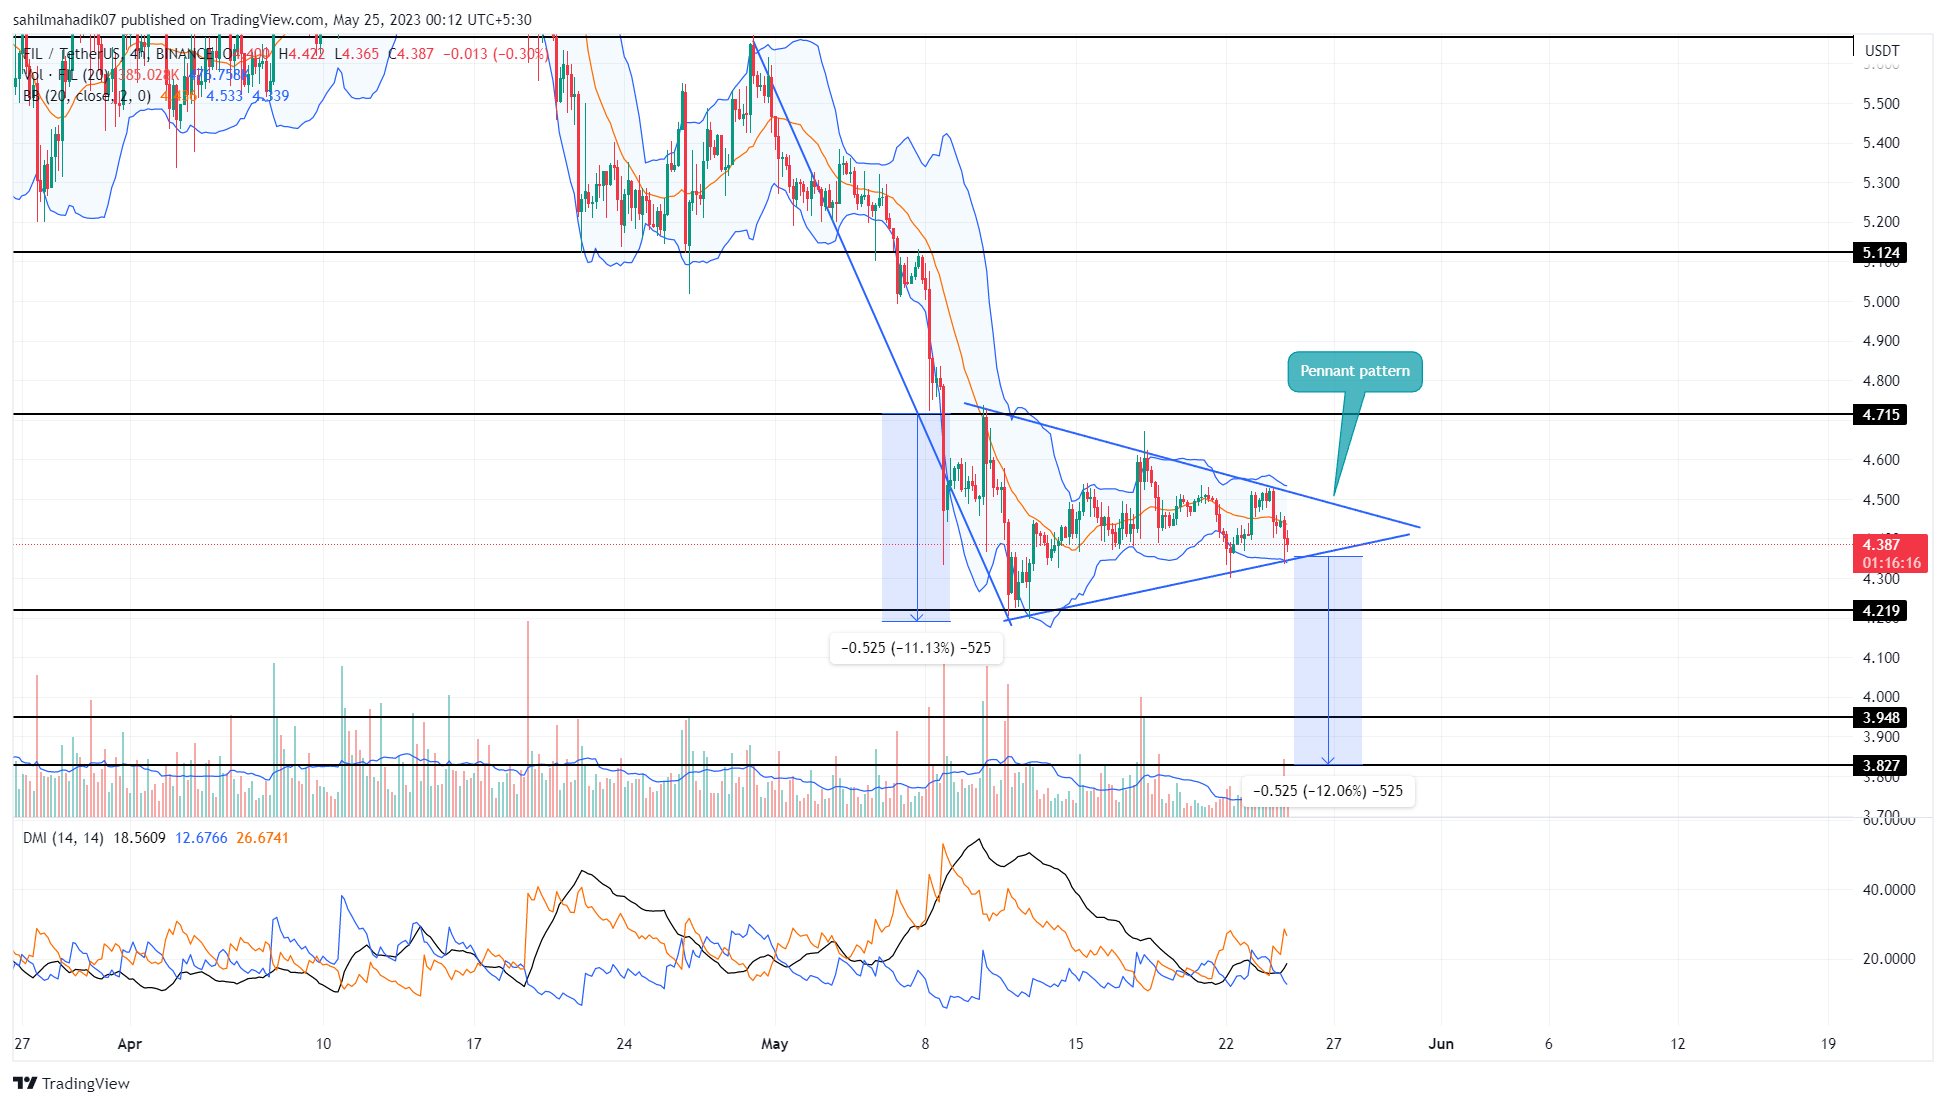 Filecoin Price Analysis: Will Filecoin Price Fall to $4 in May? Buy Opportunity?